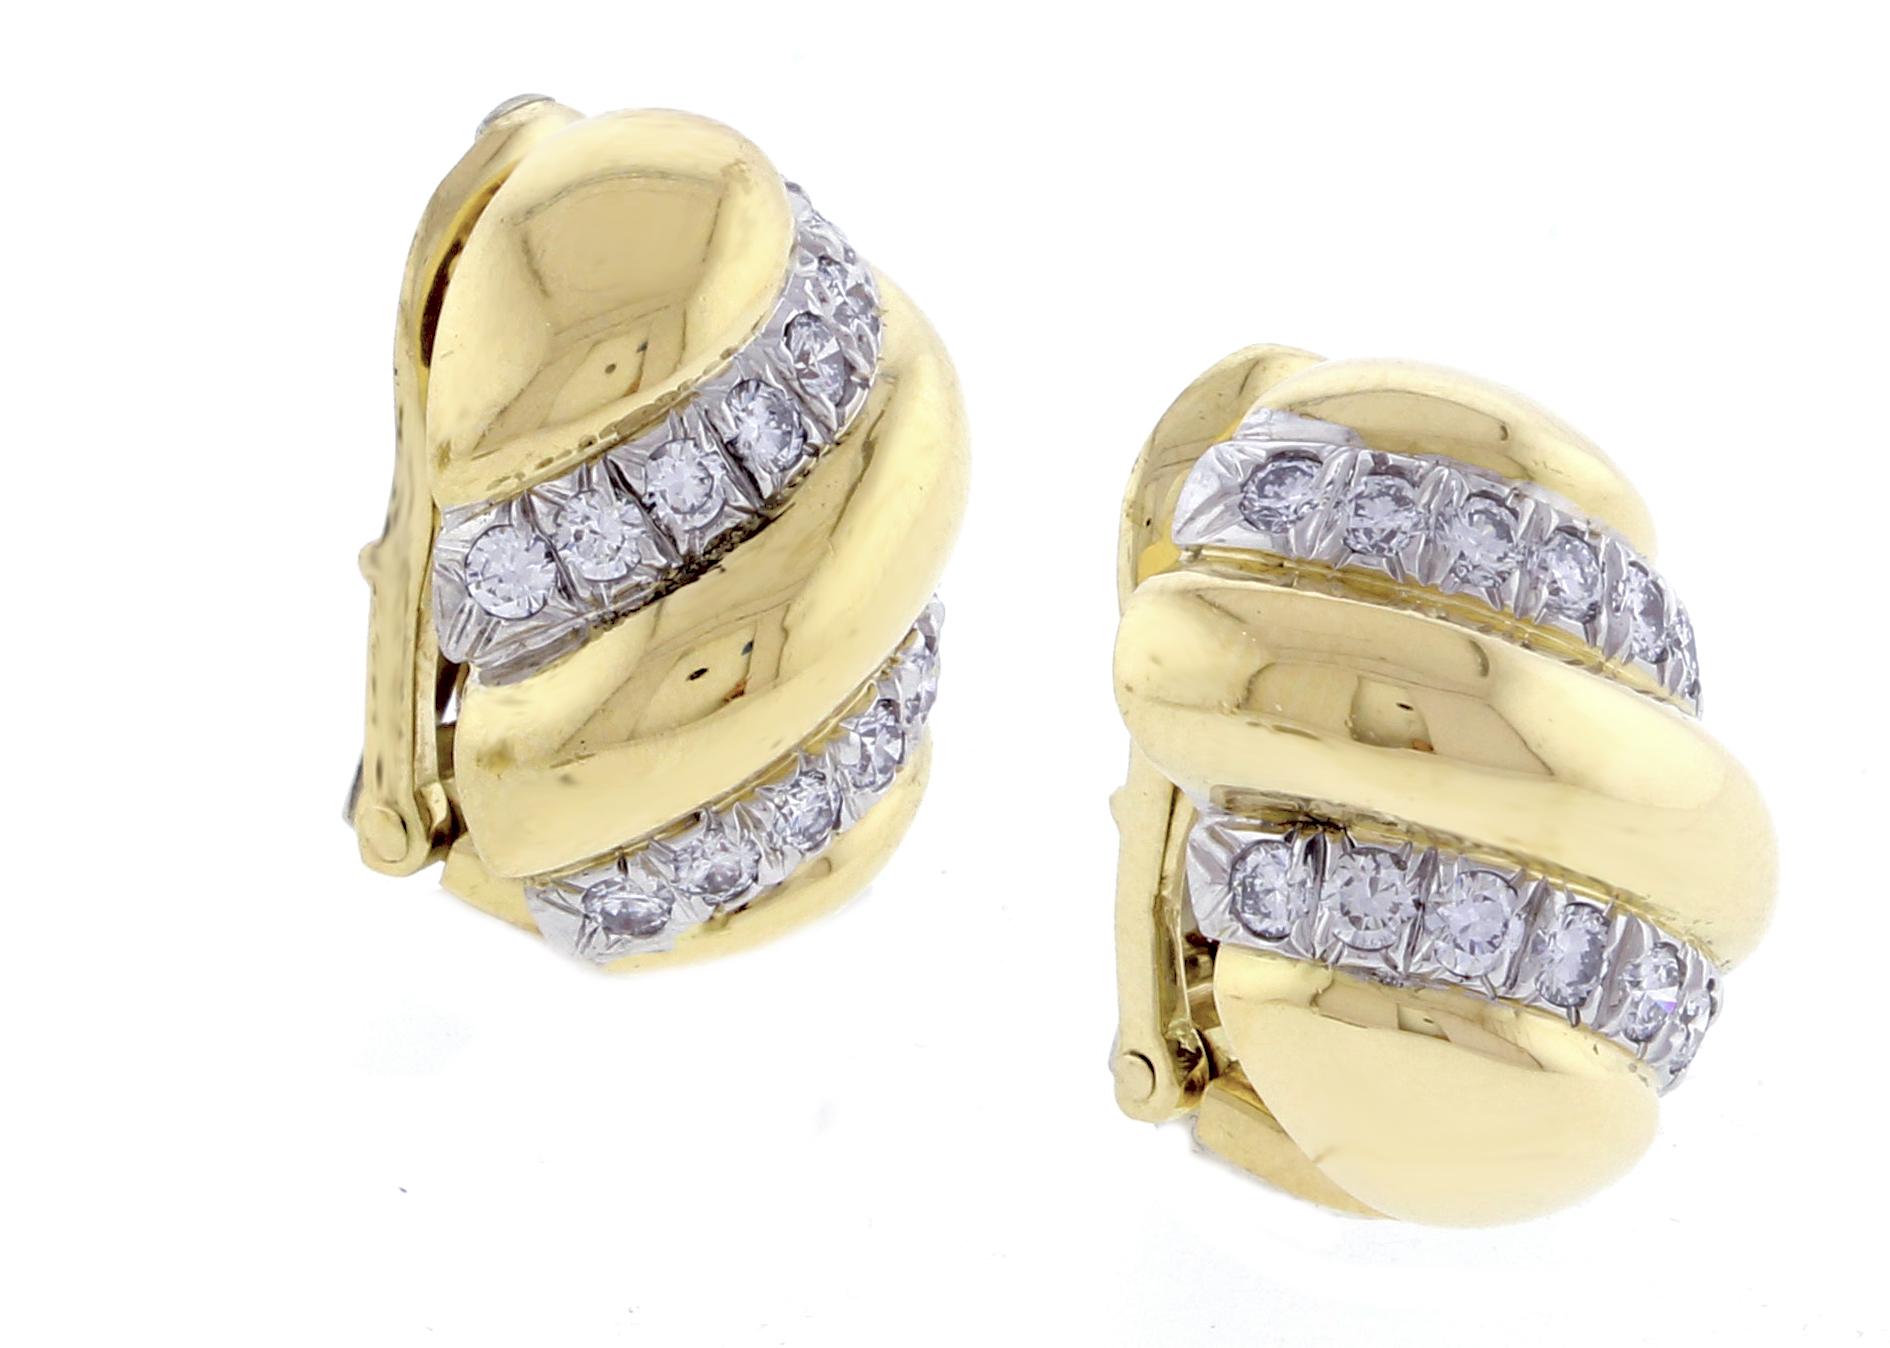 From David Webb, a pair of diamond and  18 karat  gold and platinum earrings. The earrings feature 32 brilliant diamonds weighing approximately  1.25 carat. The earrings measure  high and  ¾ and ½ wide.